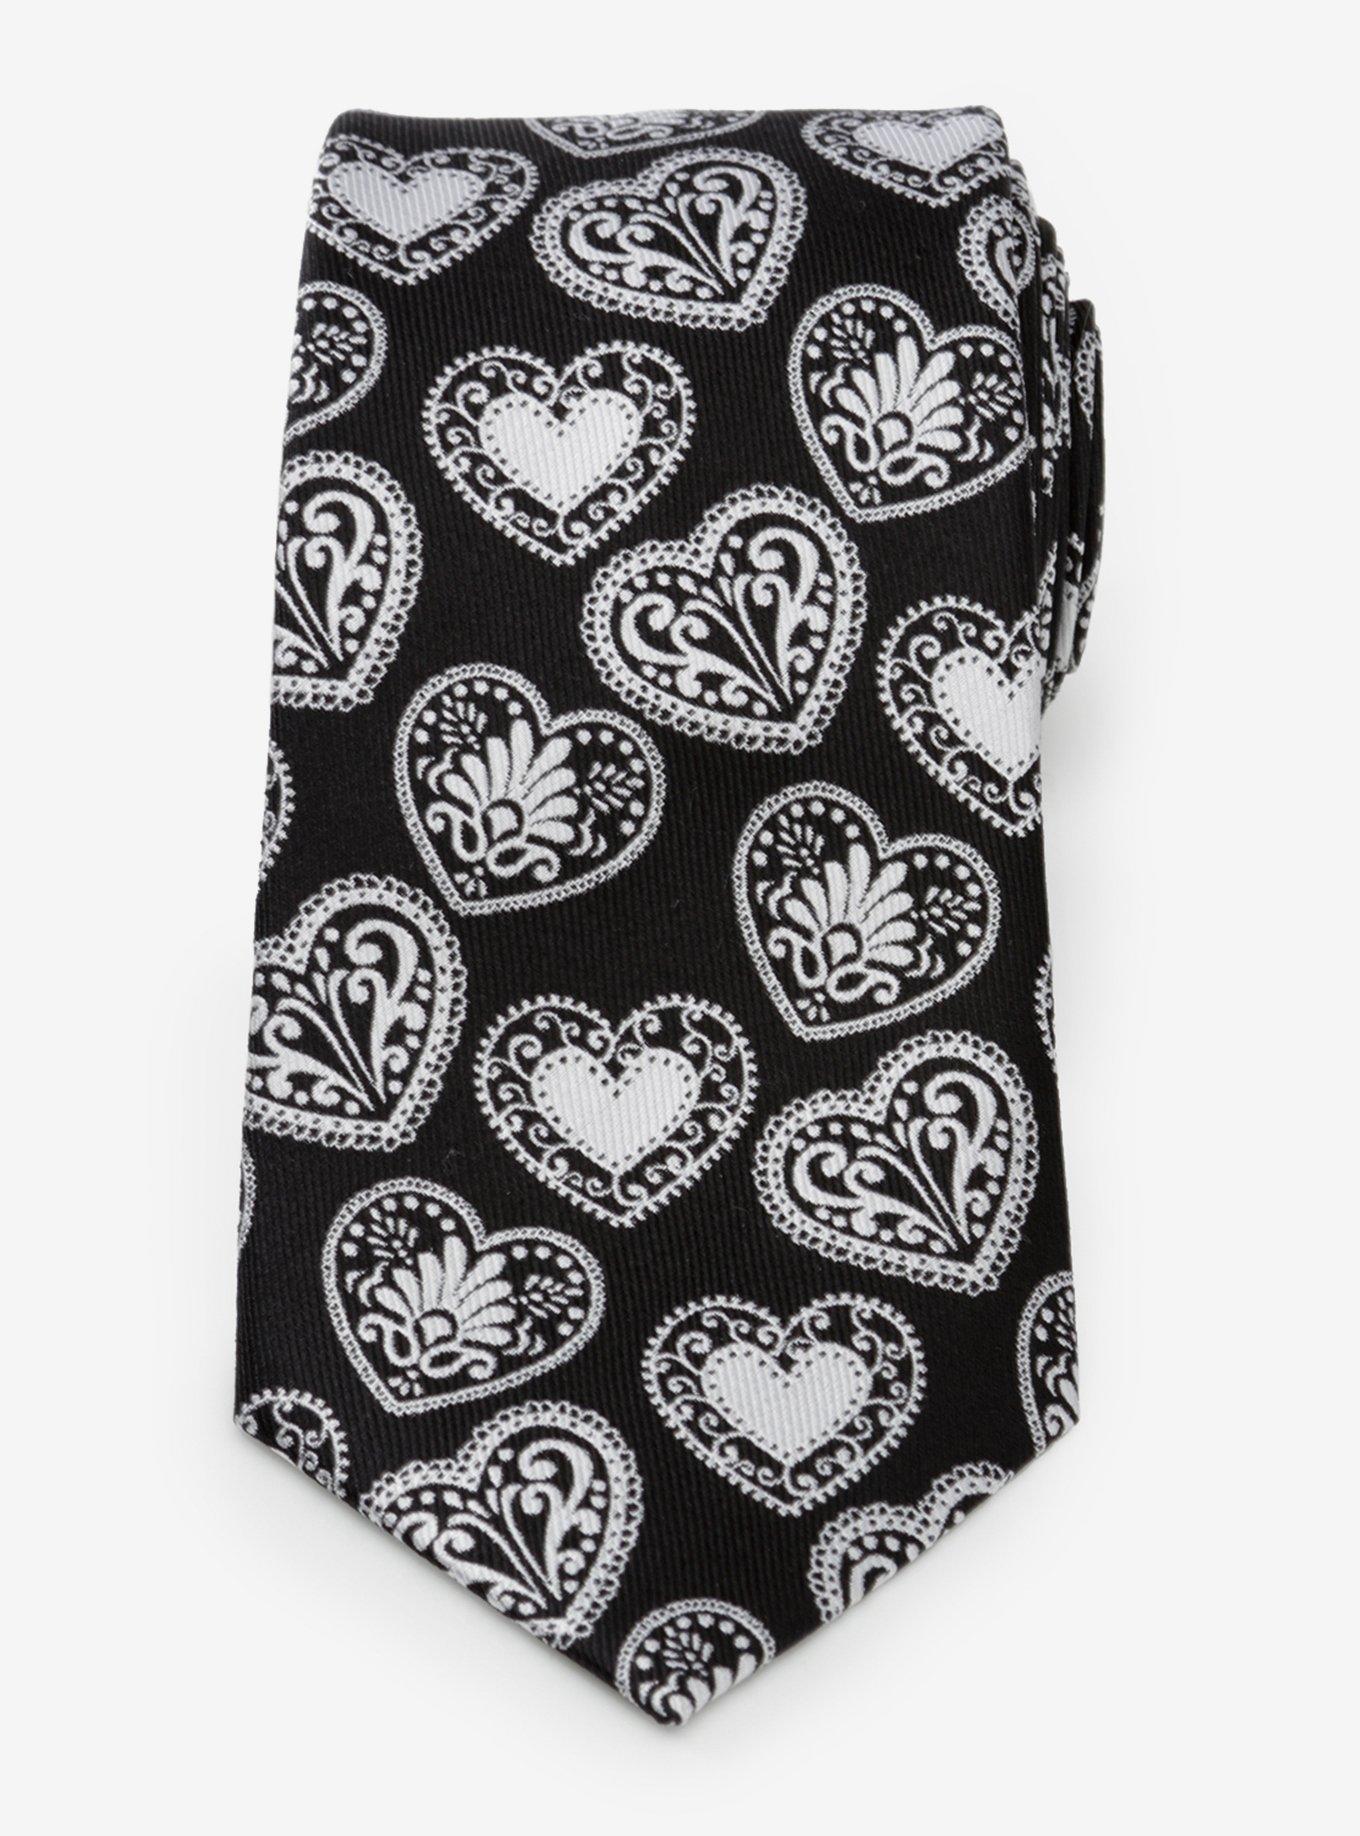 Black and White Paisley Heart Tie